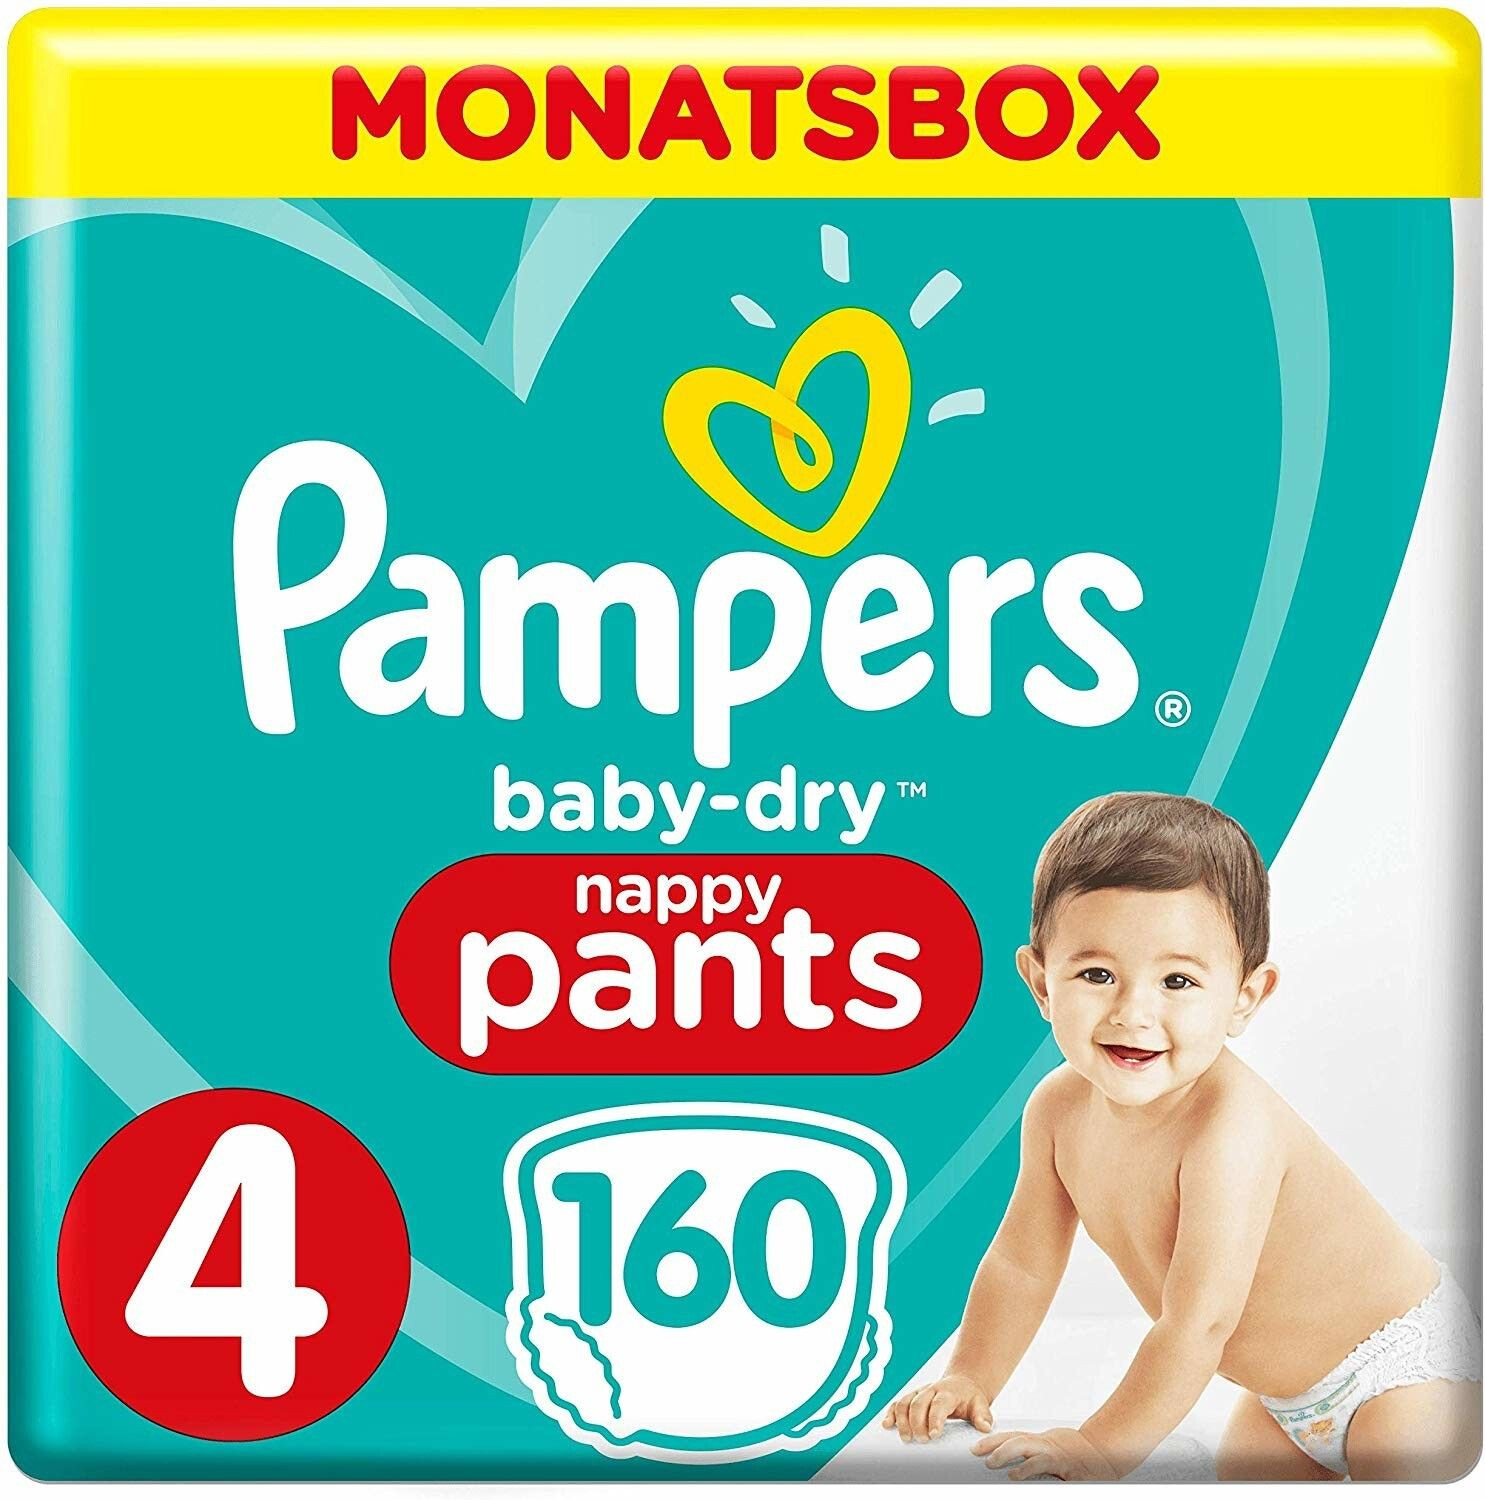 Pampers Pañales Baby-Dry, talla 4, 9-14 kg, caja mensual (1 x 204